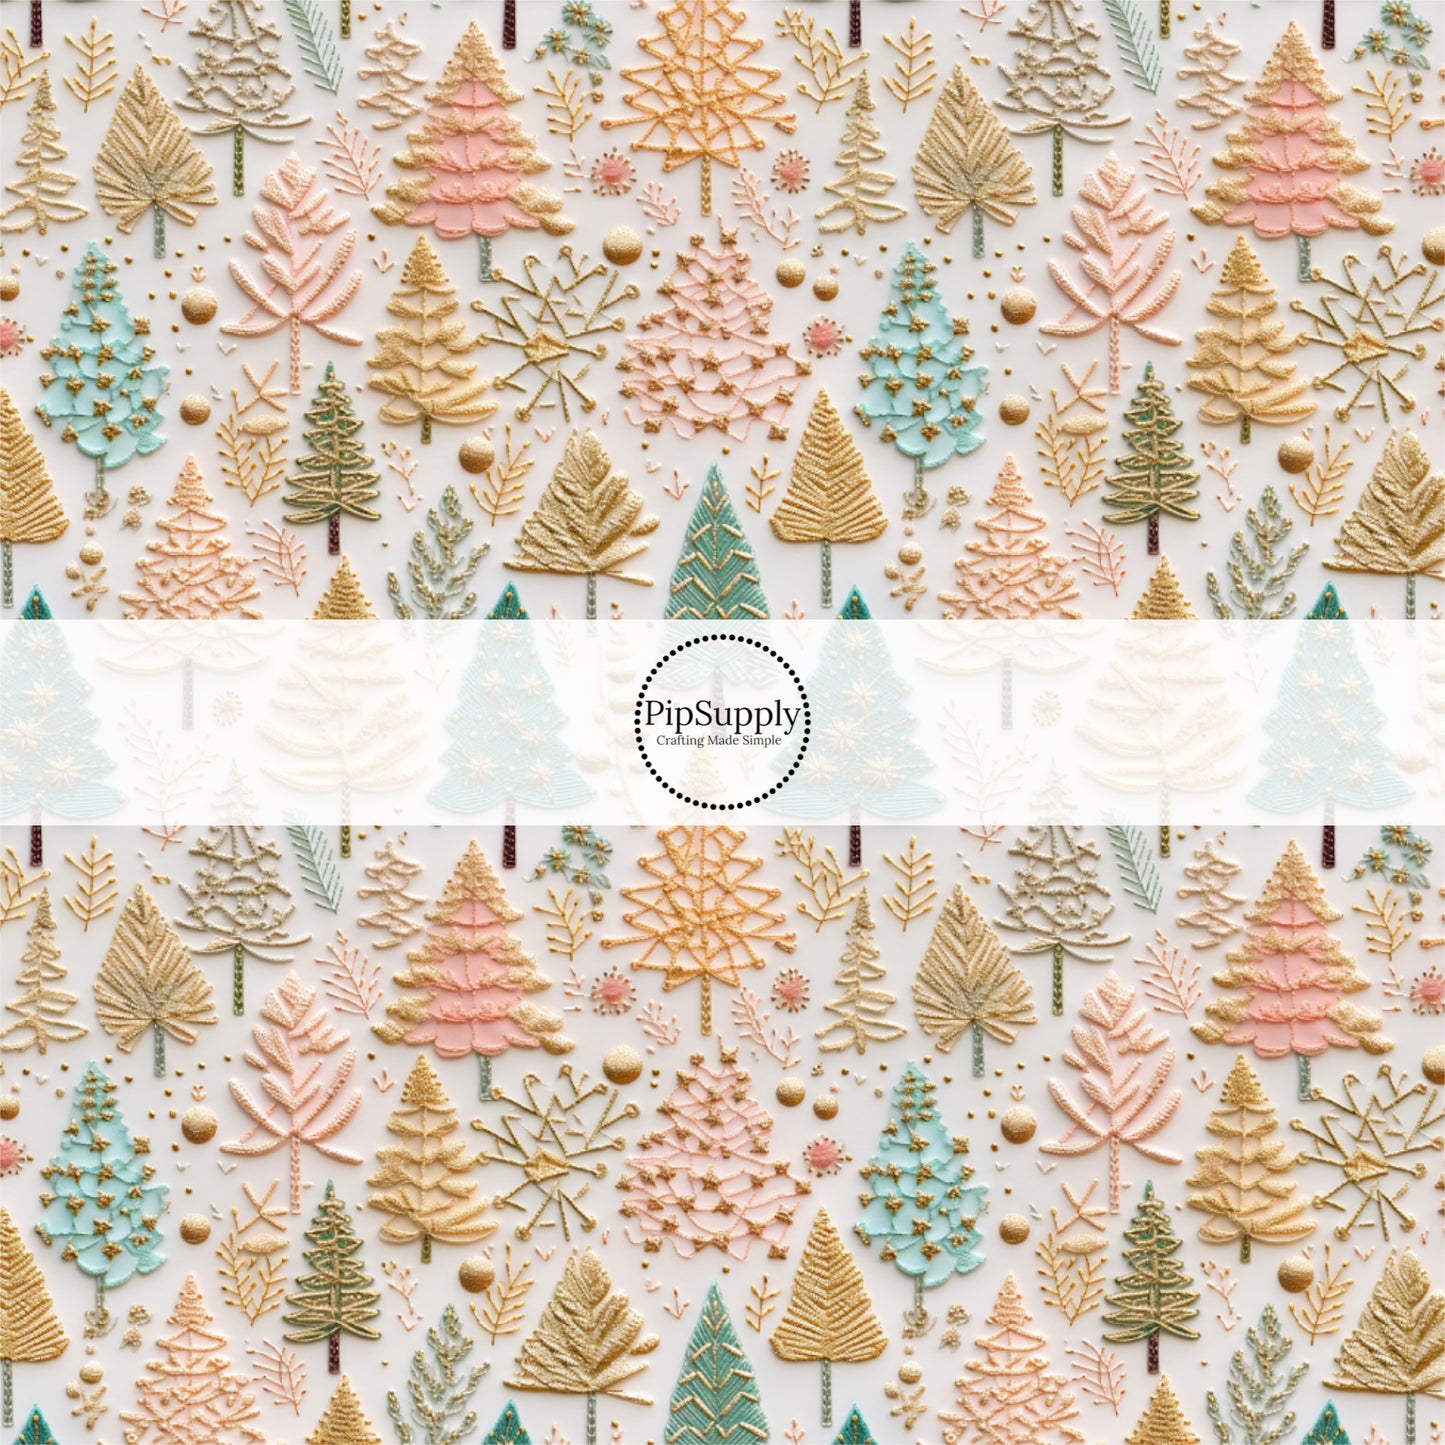 These holiday sewn pattern themed fabric by the yard features green and pastel pink Christmas trees on cream. This fun Christmas fabric can be used for all your sewing and crafting needs!